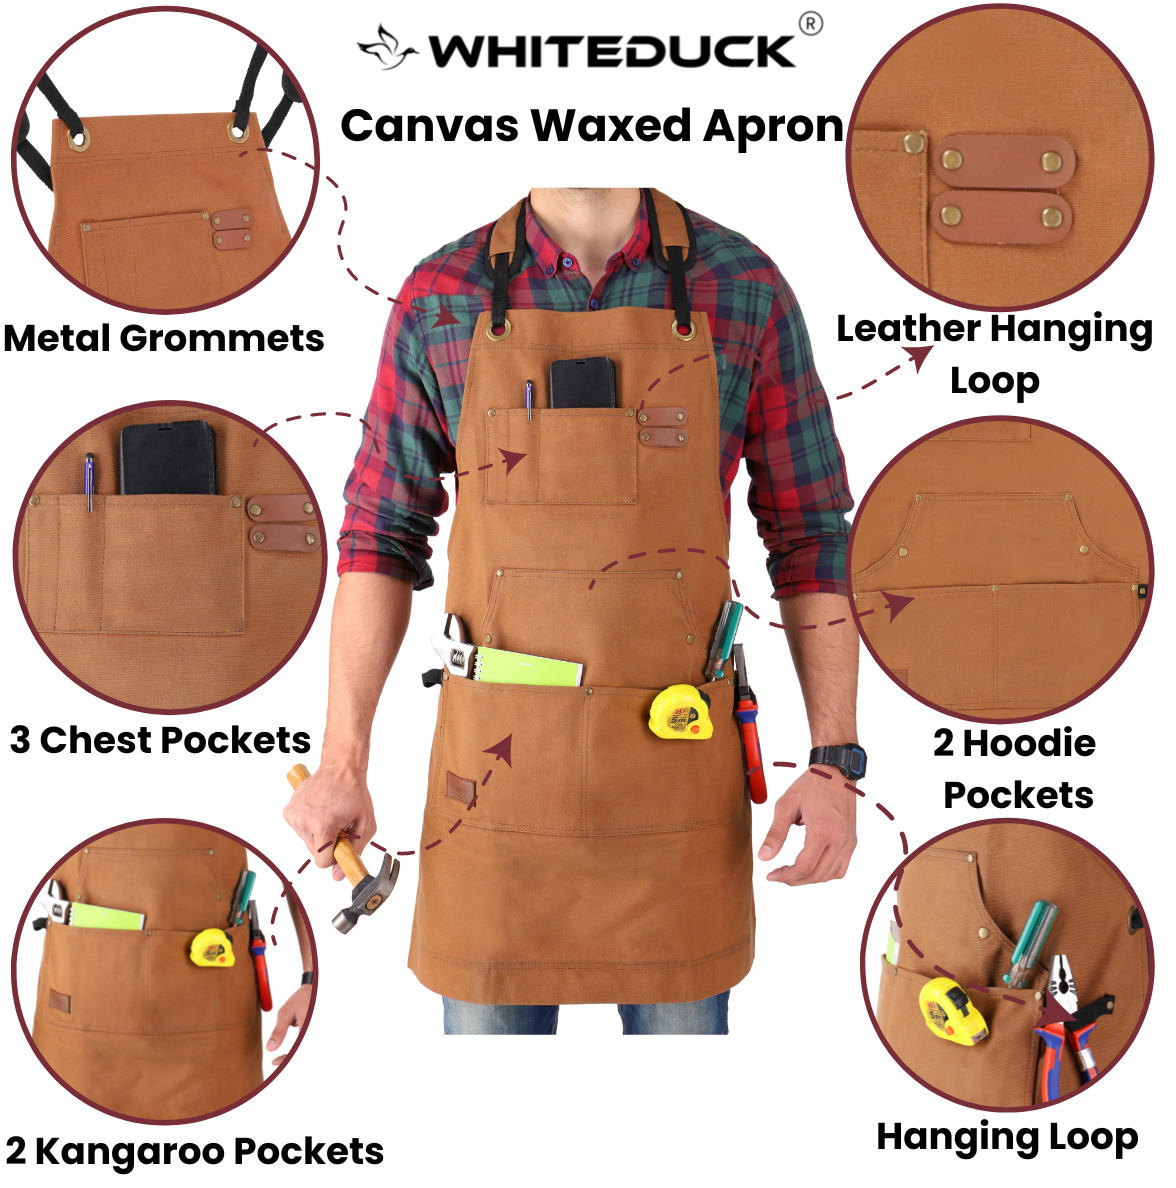 WHITEDUCK Men Apron 24oz Waxed Canvas Work Apron Scratch, Stain, Water Resistant